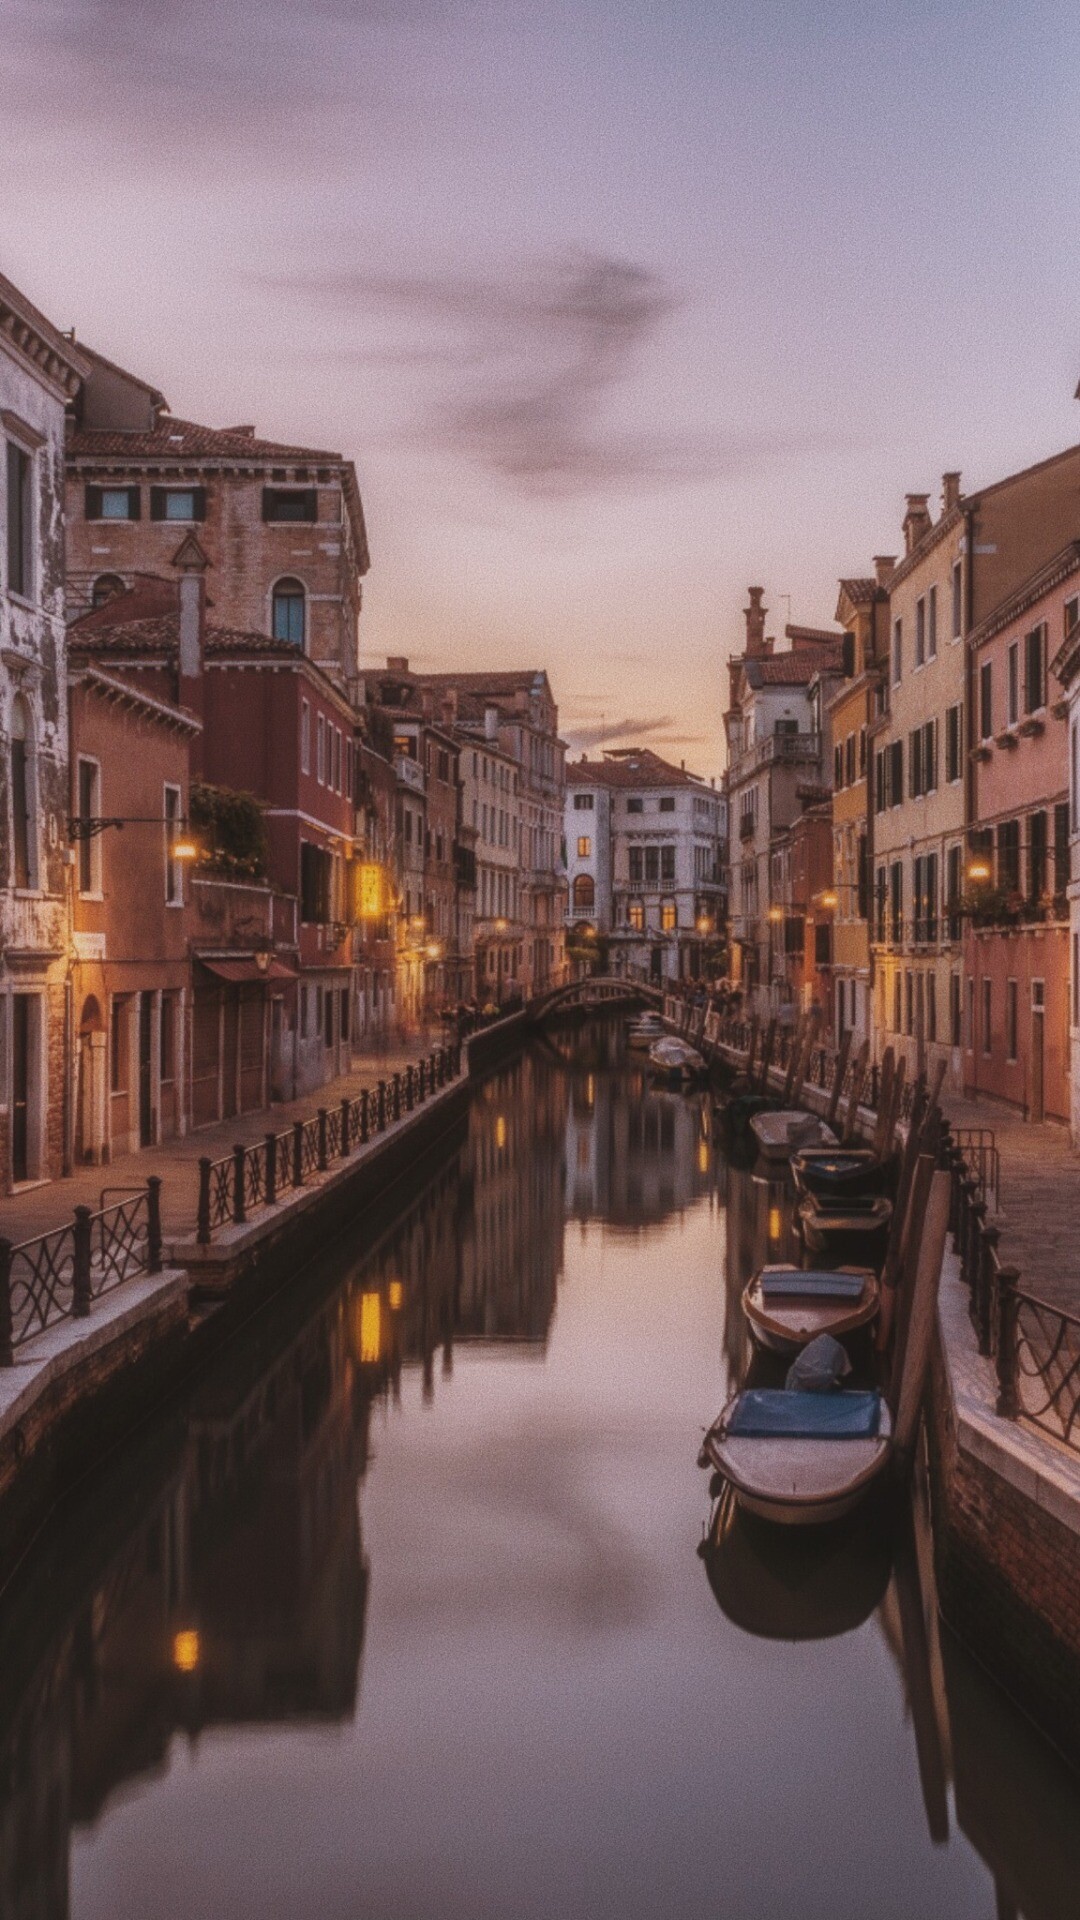 Italy: Venice, a city with waterways instead of streets. 1080x1920 Full HD Background.